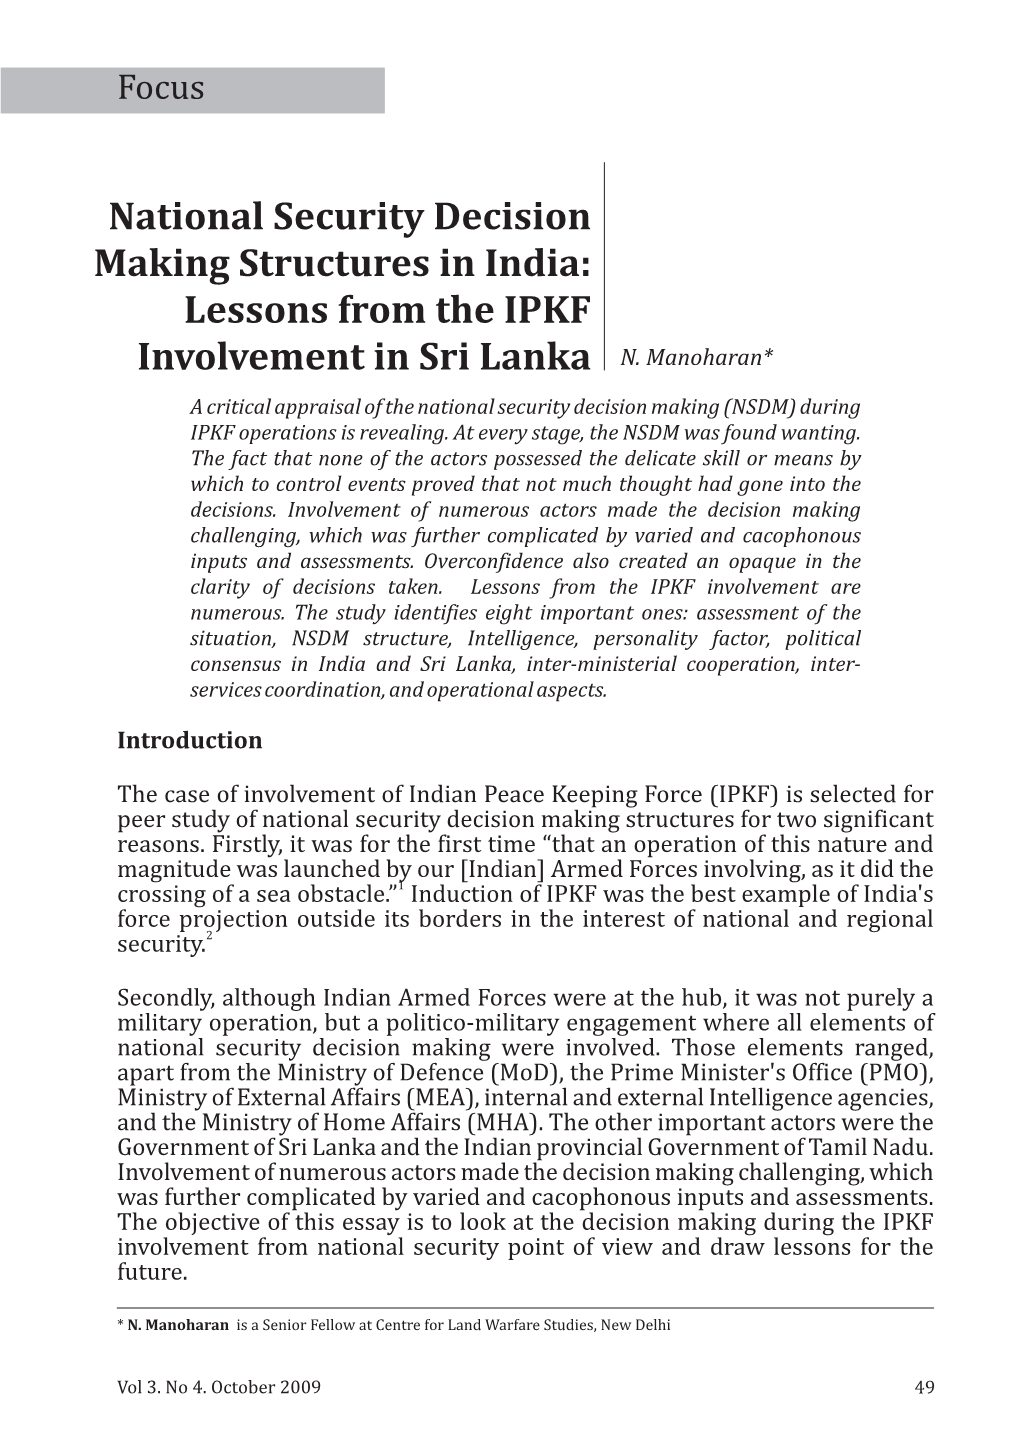 National Security Decision Making Structures in India: Lessons from the IPKF Involvement in Sri Lanka N